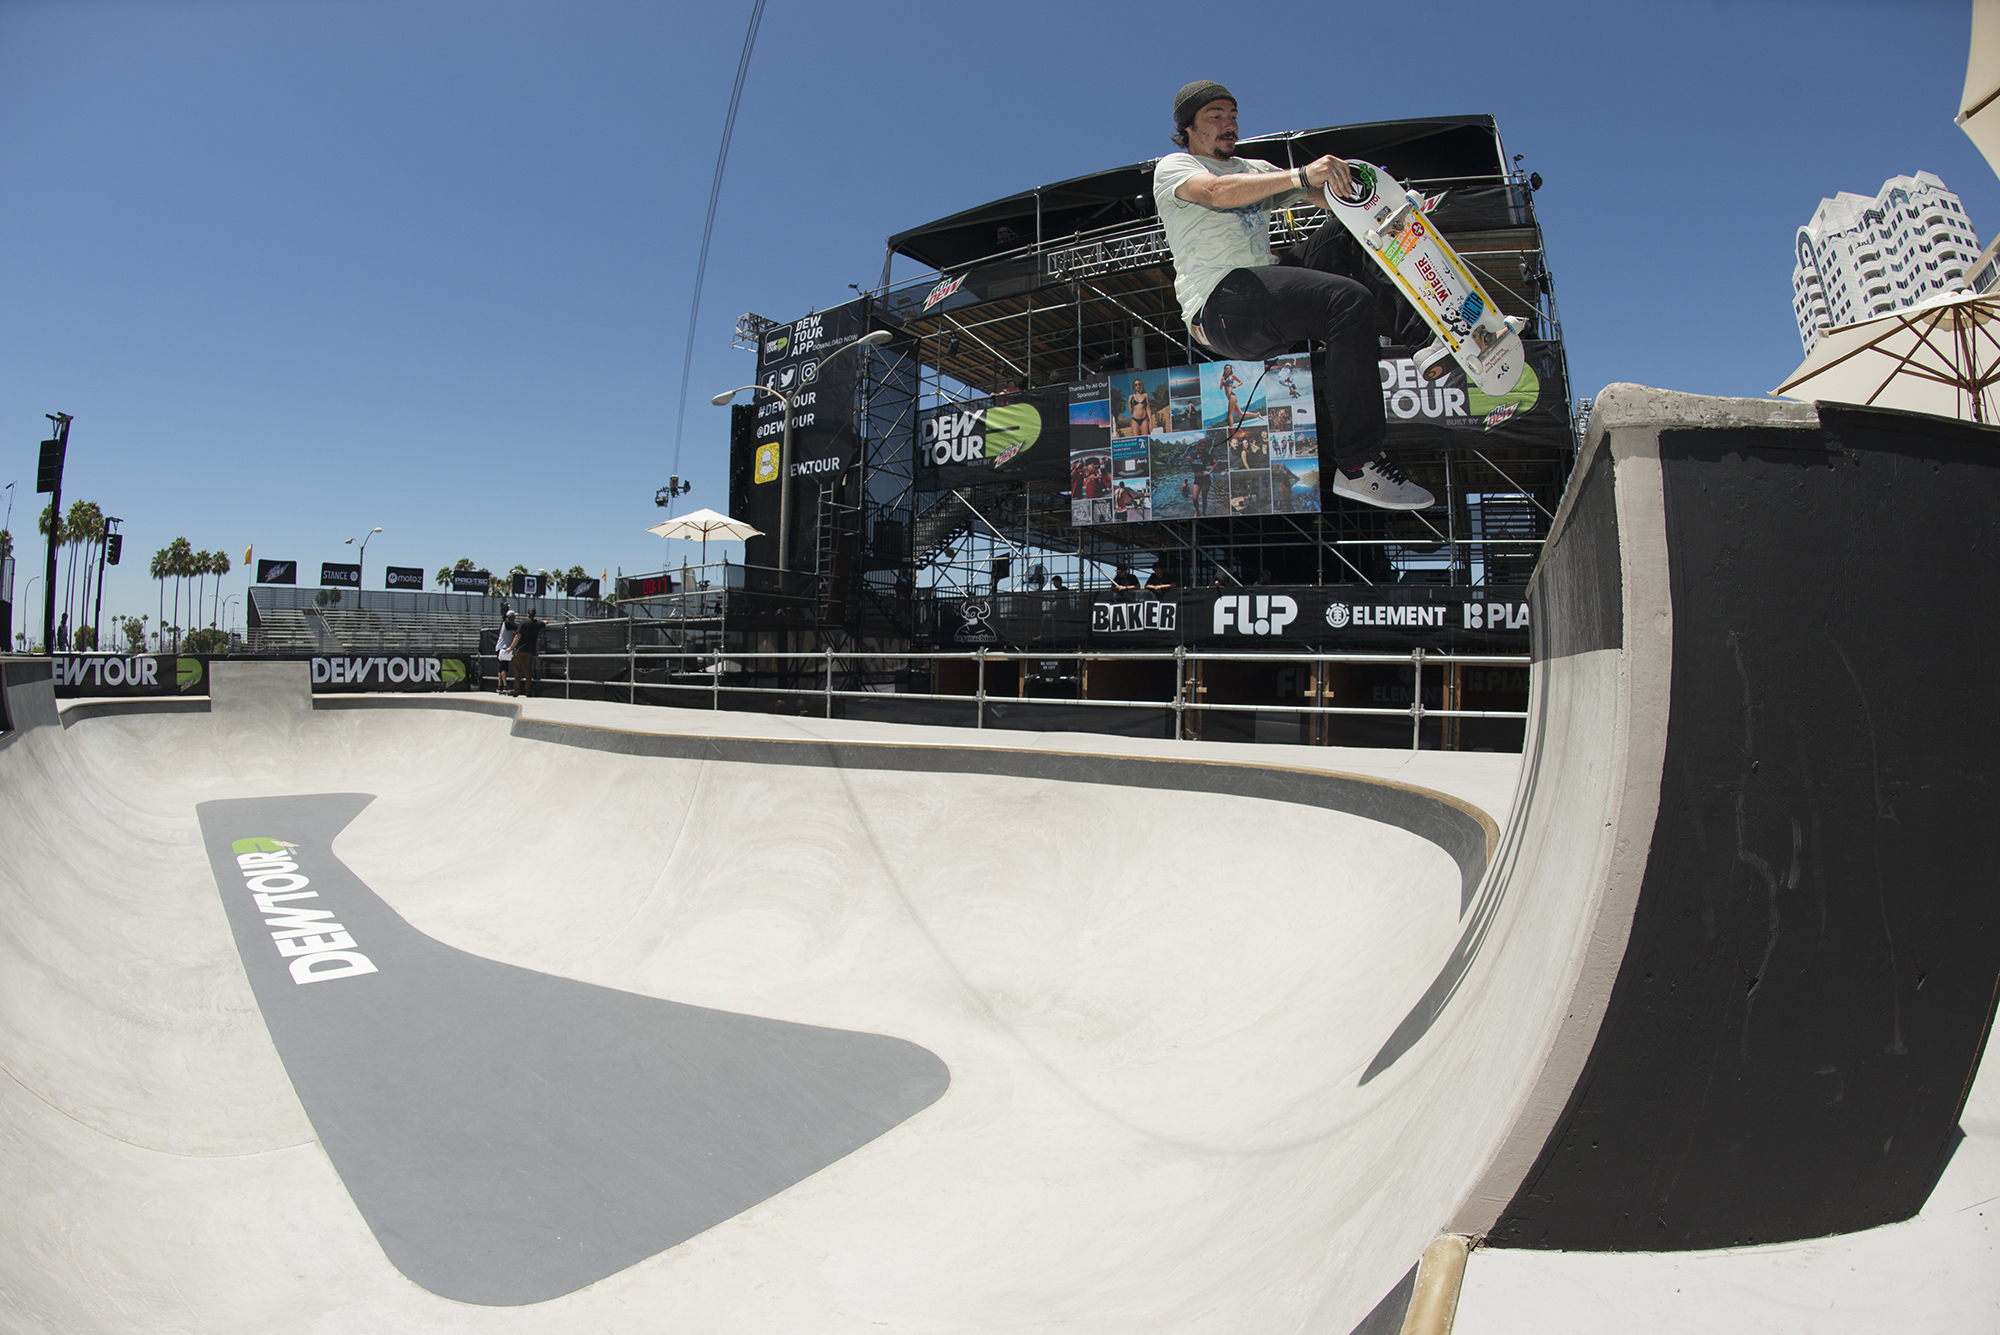 Caswell_Berry_lien_to_tail_bowl_practice__dew_tour_long_beach_Chami